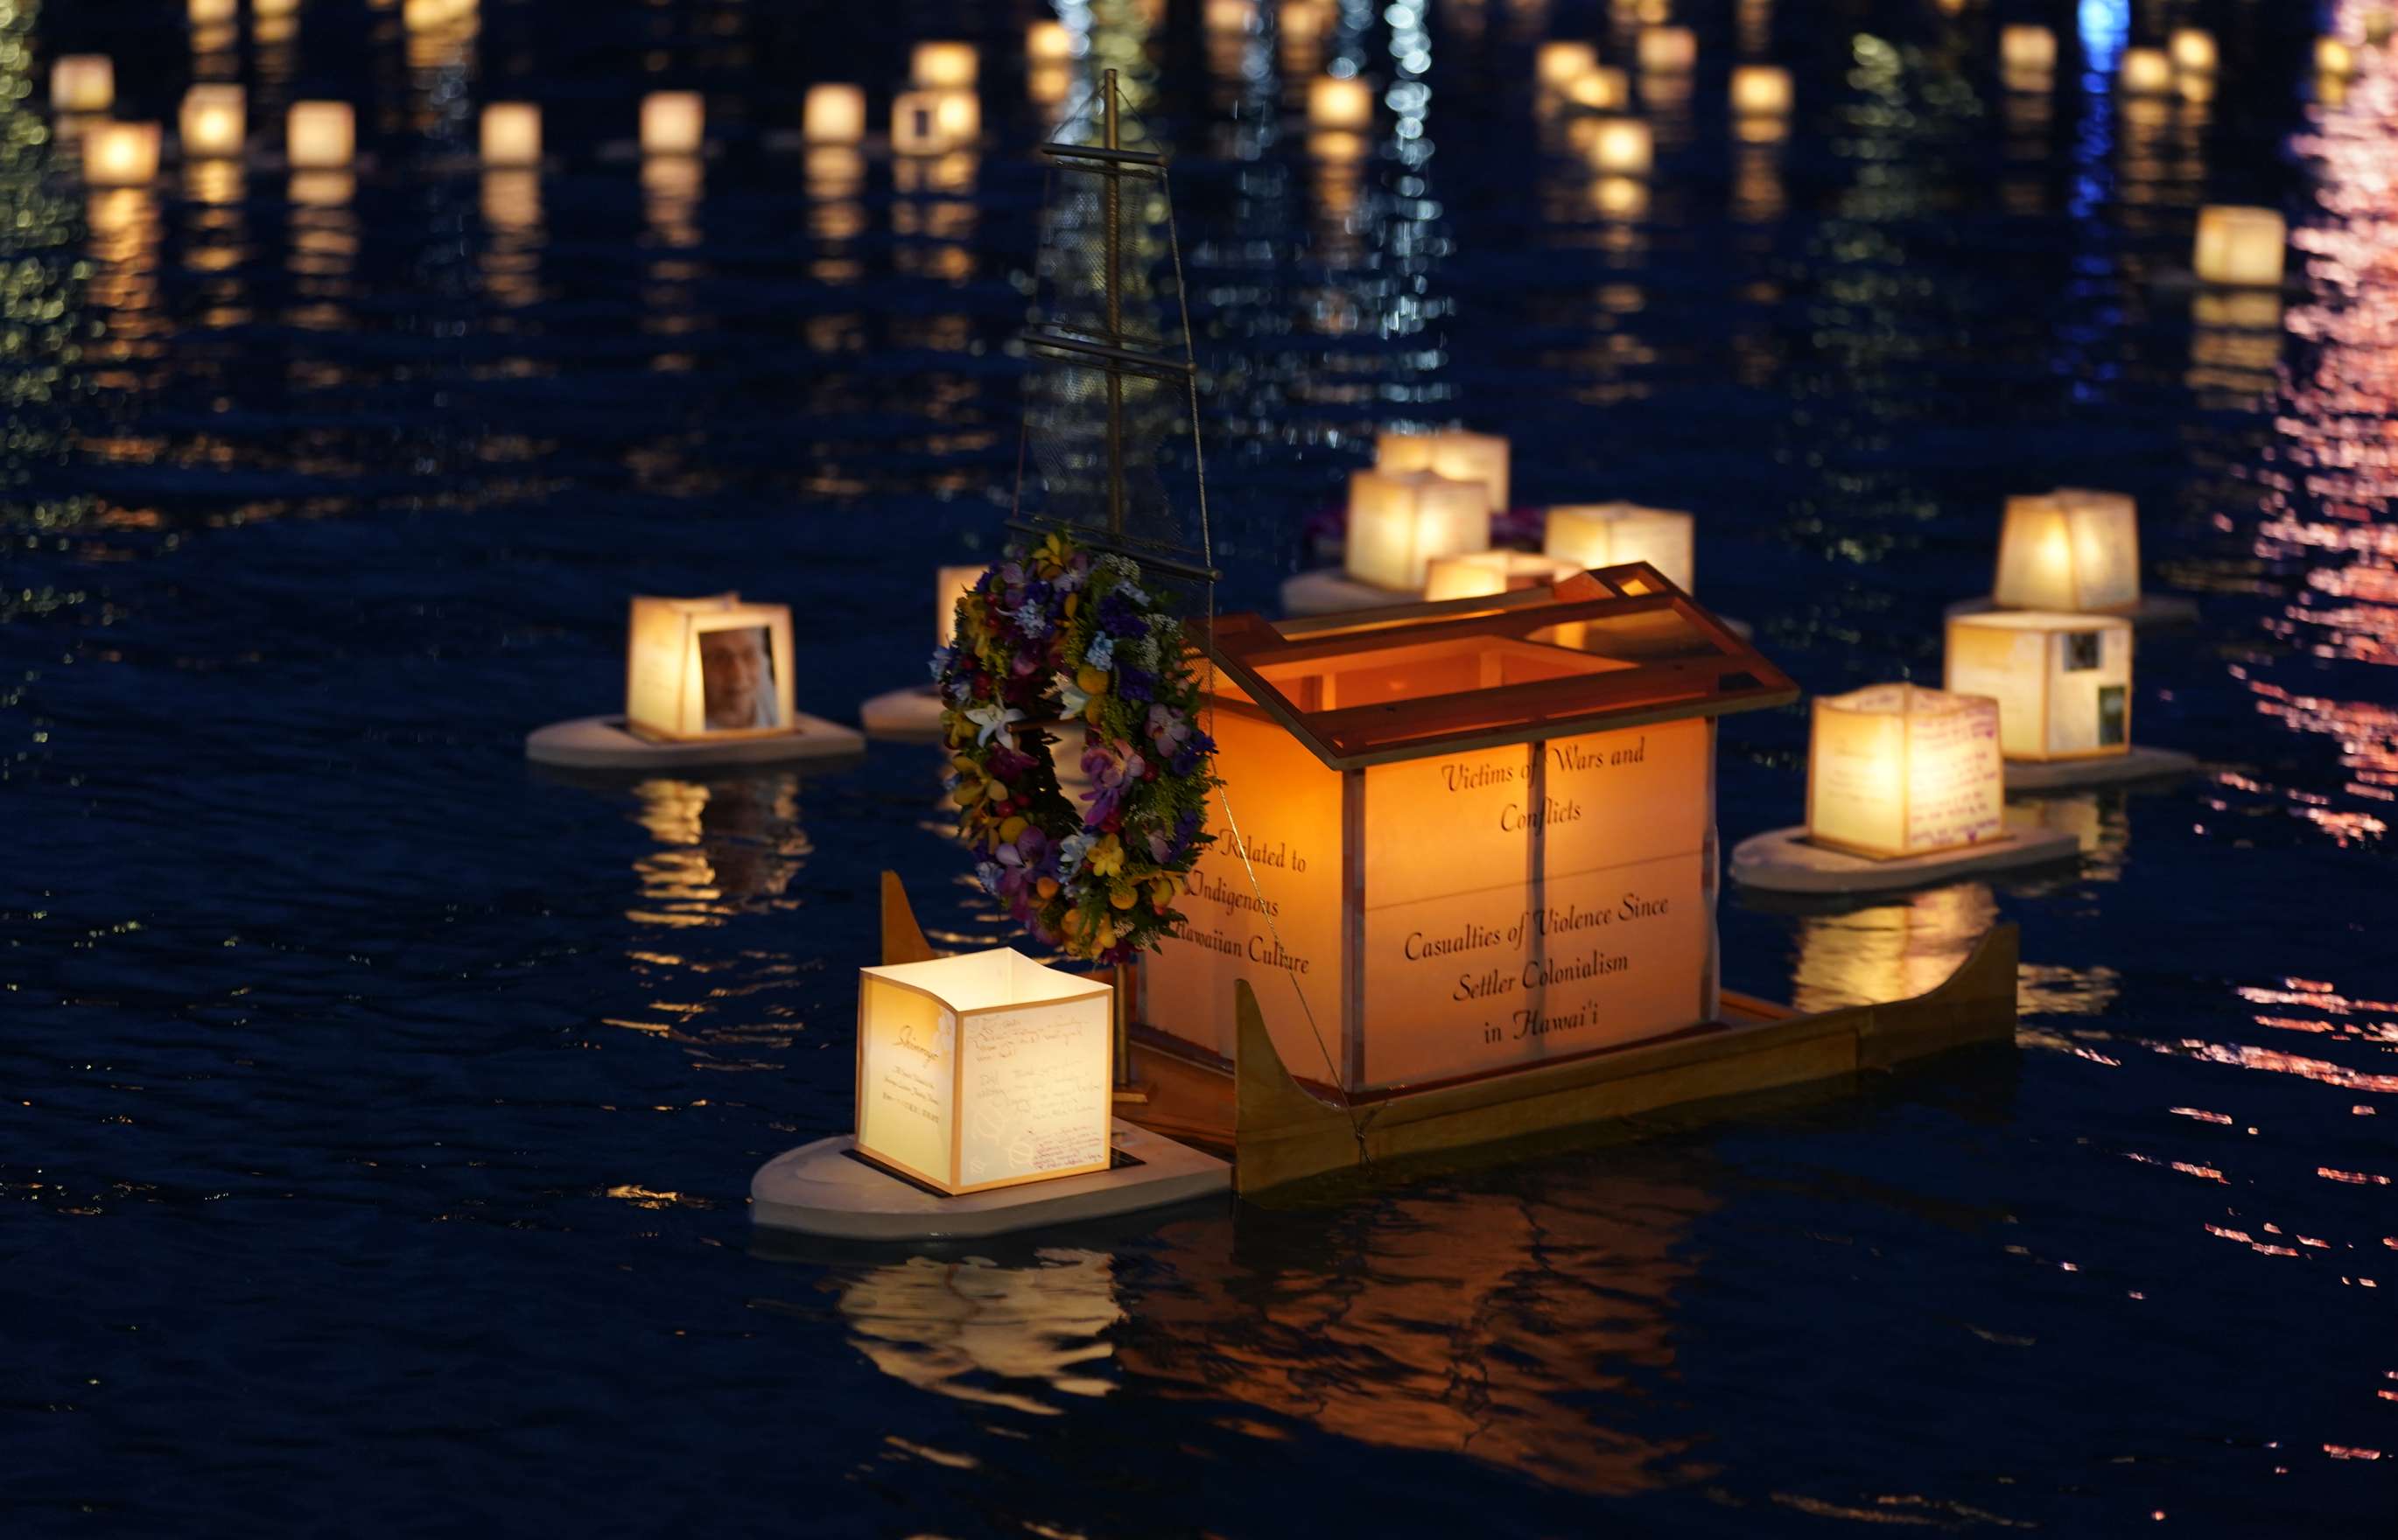 A large illuminated double-hulled floating lantern made of wood and paper, with a wreath hanging from its bow, floats amid numerous smaller illuminated floating lanterns on an ocean bay at night.